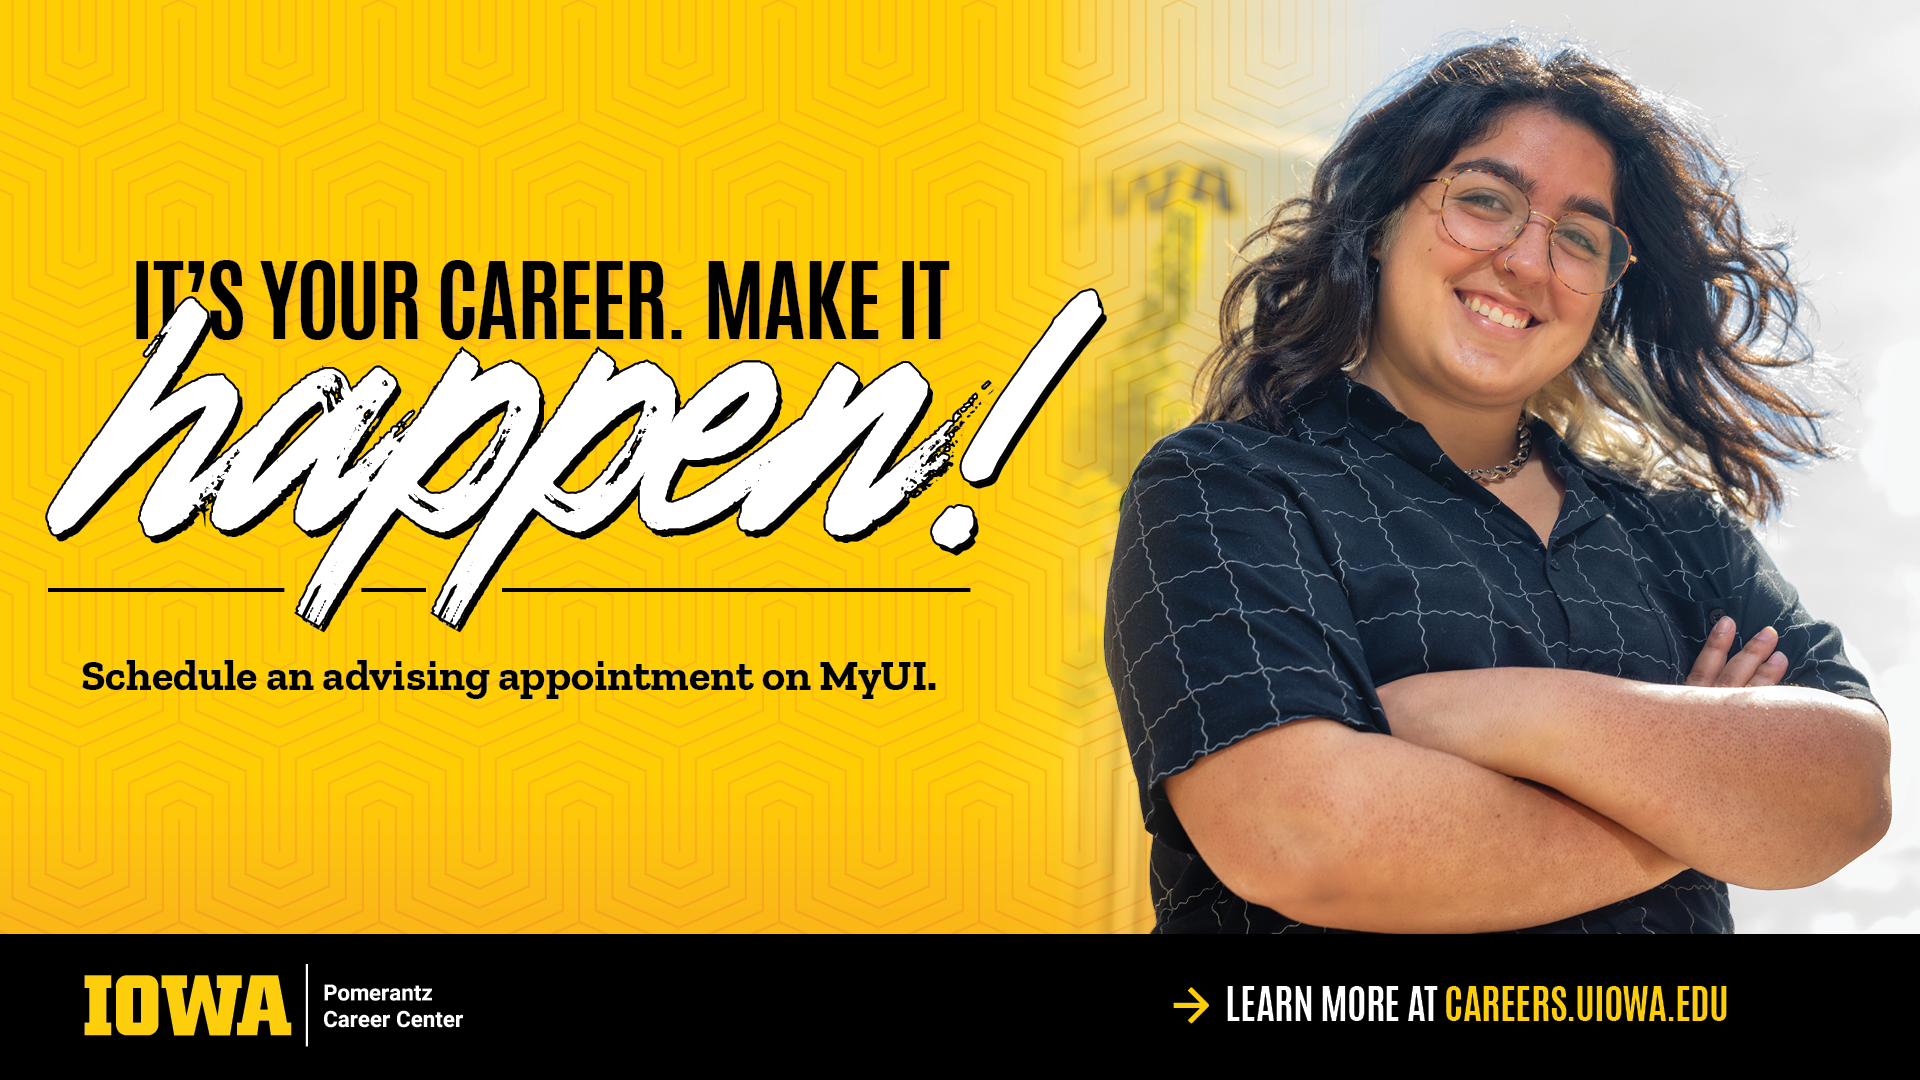 It's your career. Make it happen! Schedule an advising appointment on MyUI.